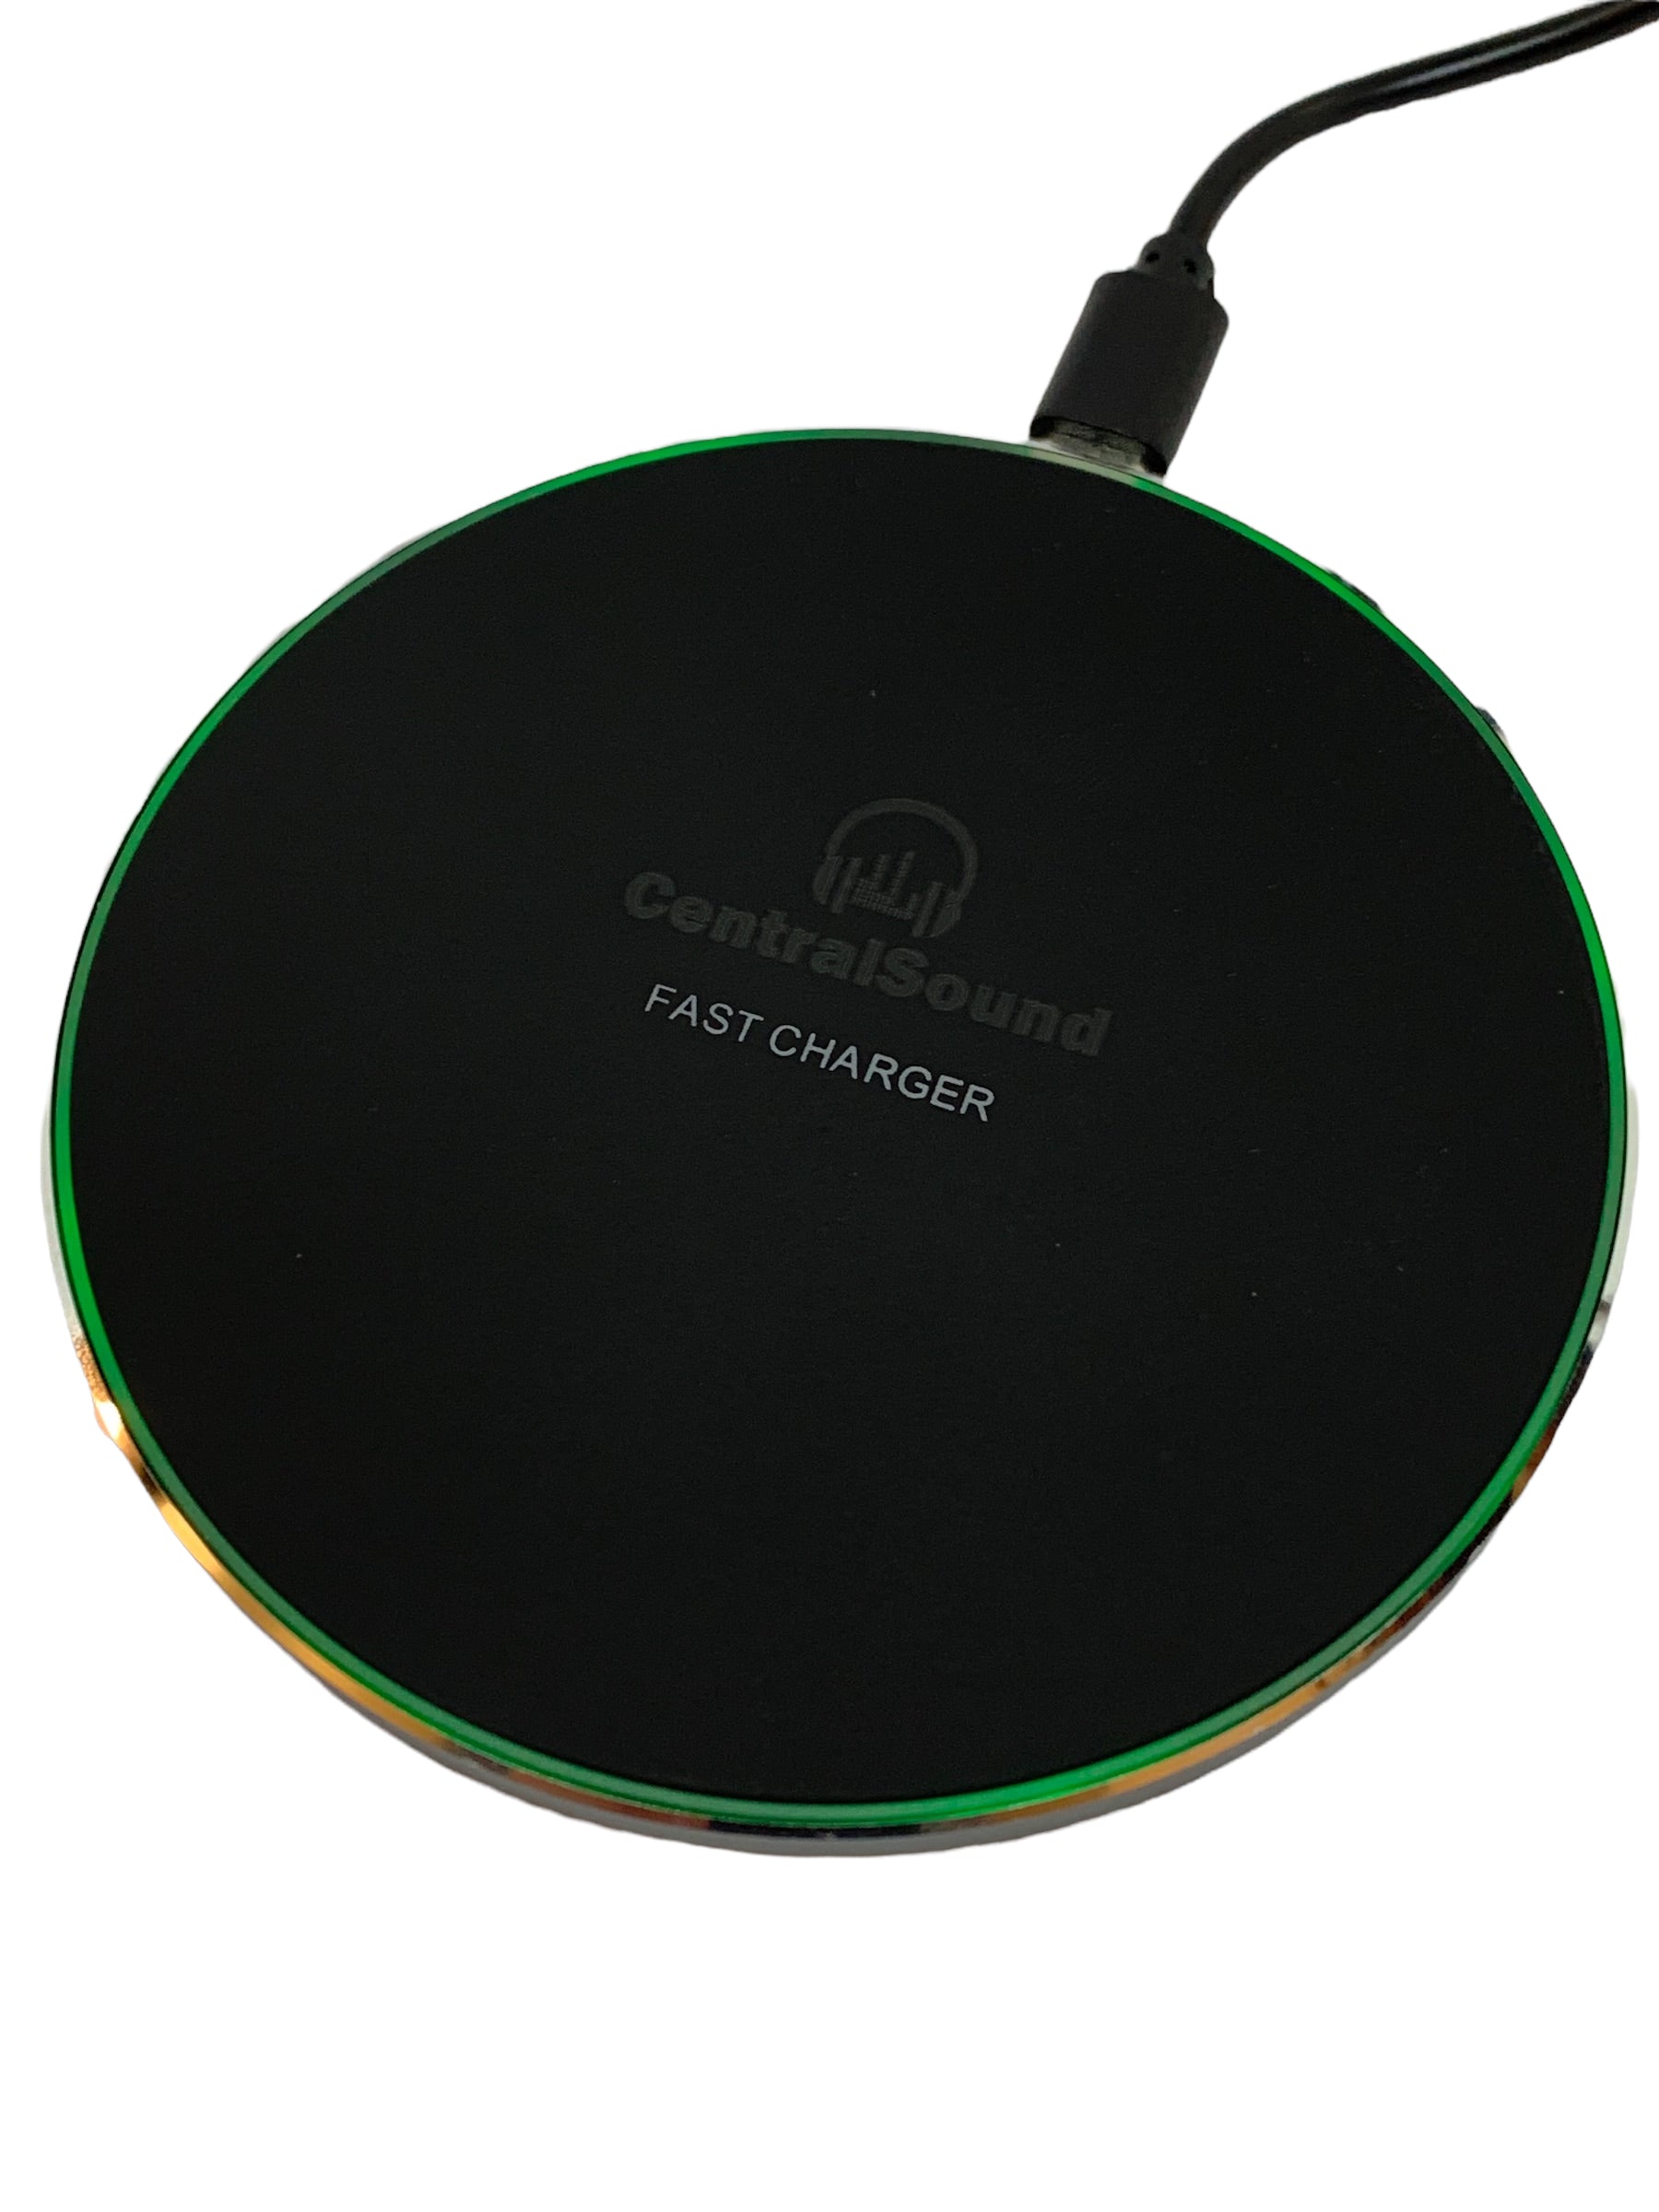 CentralSound Low Profile Qi Wireless Fast Charger Charging Pad |  Black - CentralSound